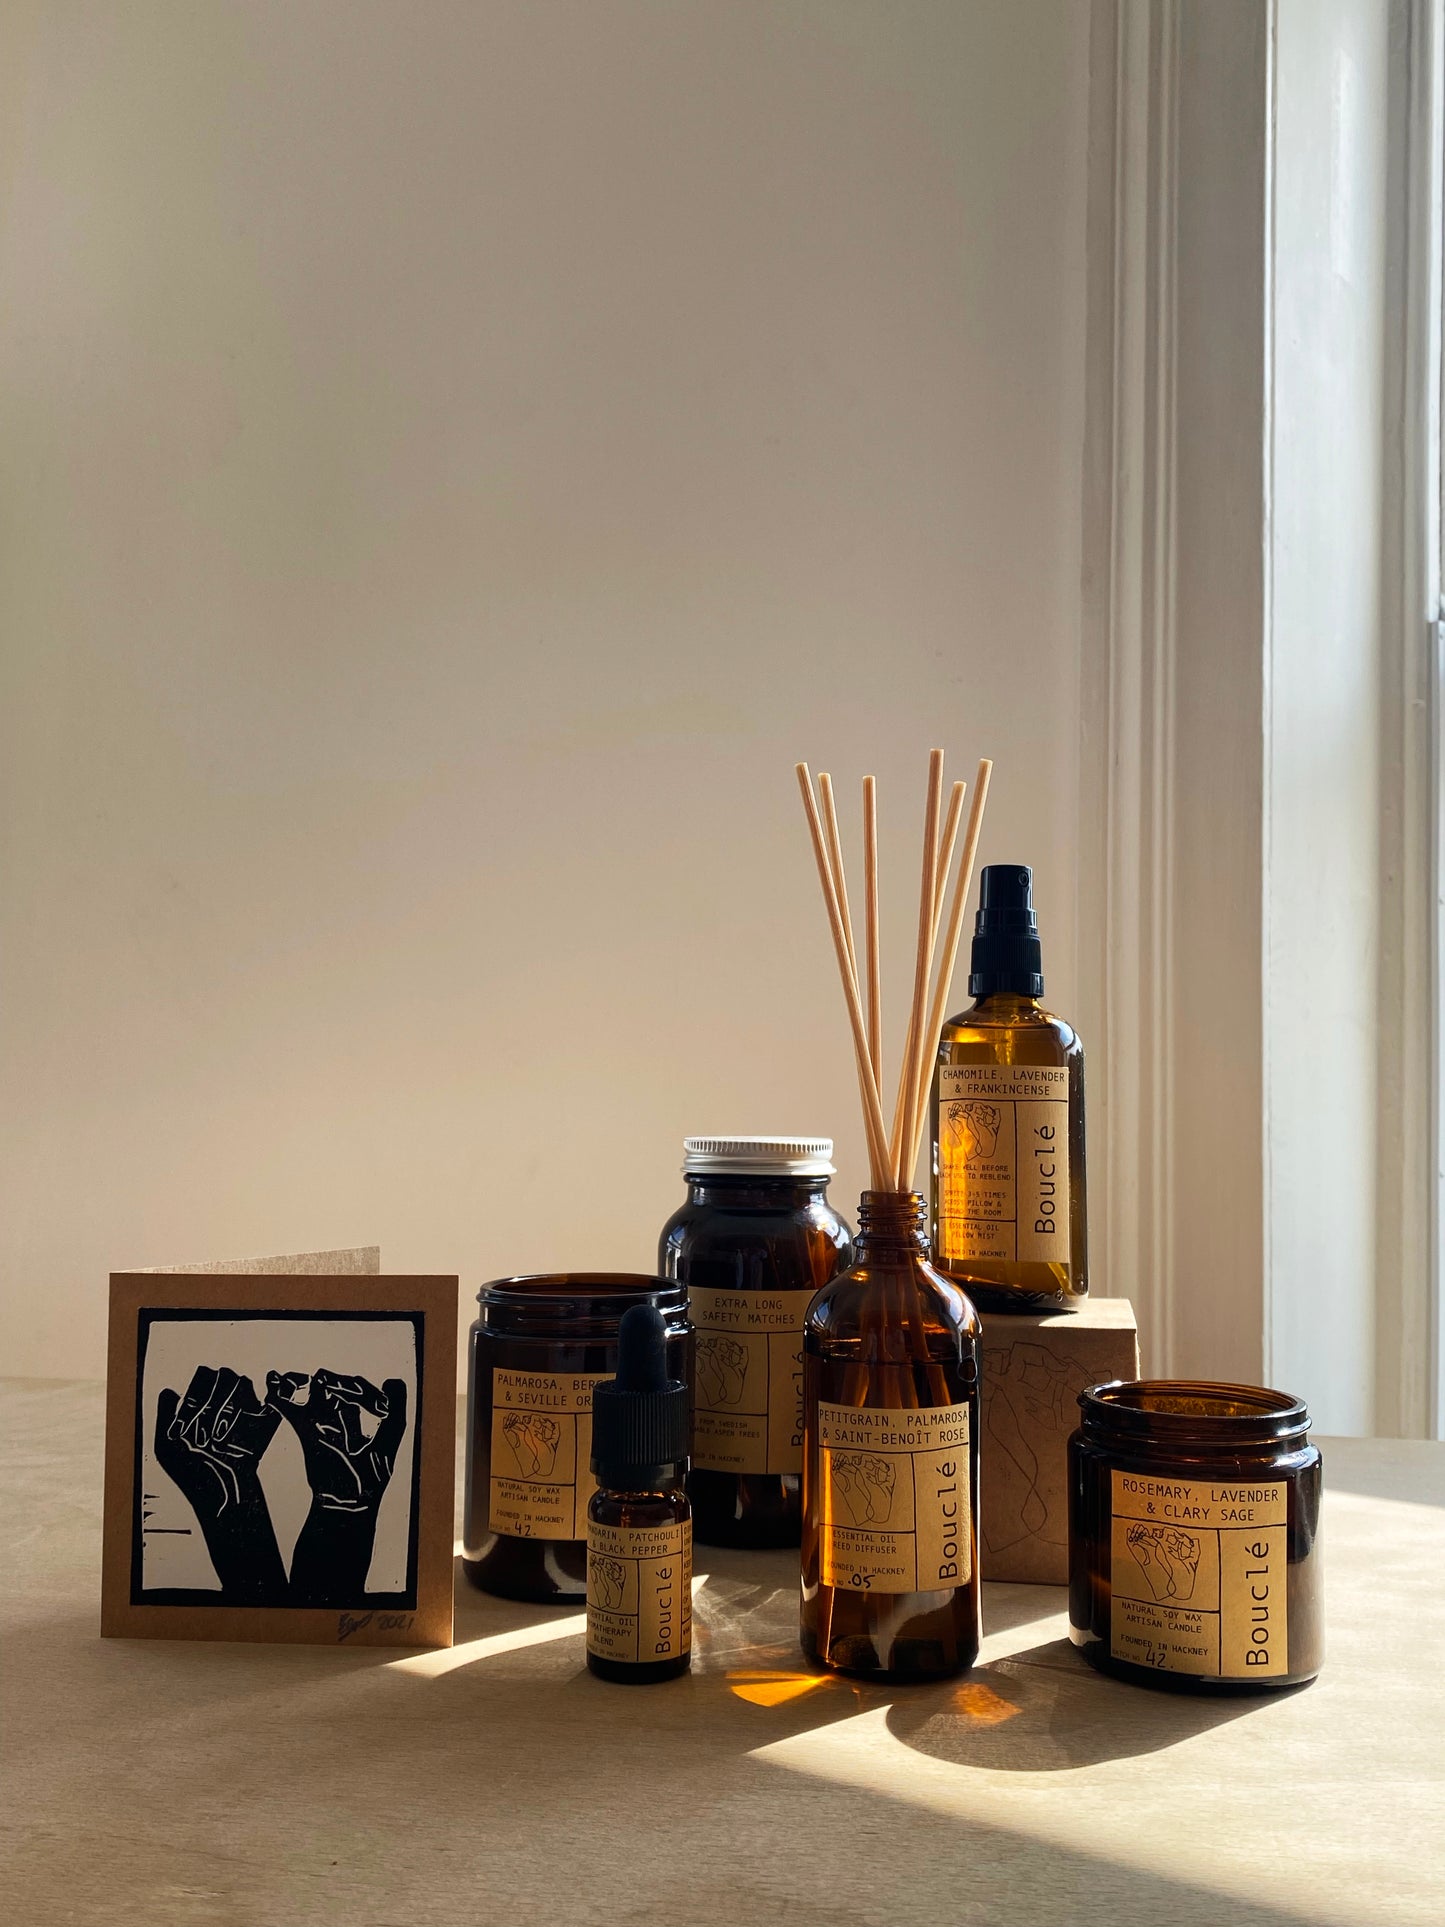 All natural Bouclé London products for scenting the home with essential oil goodness. There are 2 aromatherapy candles, a invigorating reed diffuser, a relaxing pillow spray, essential oil blend and hand printed card perfect to send straight to the recipient